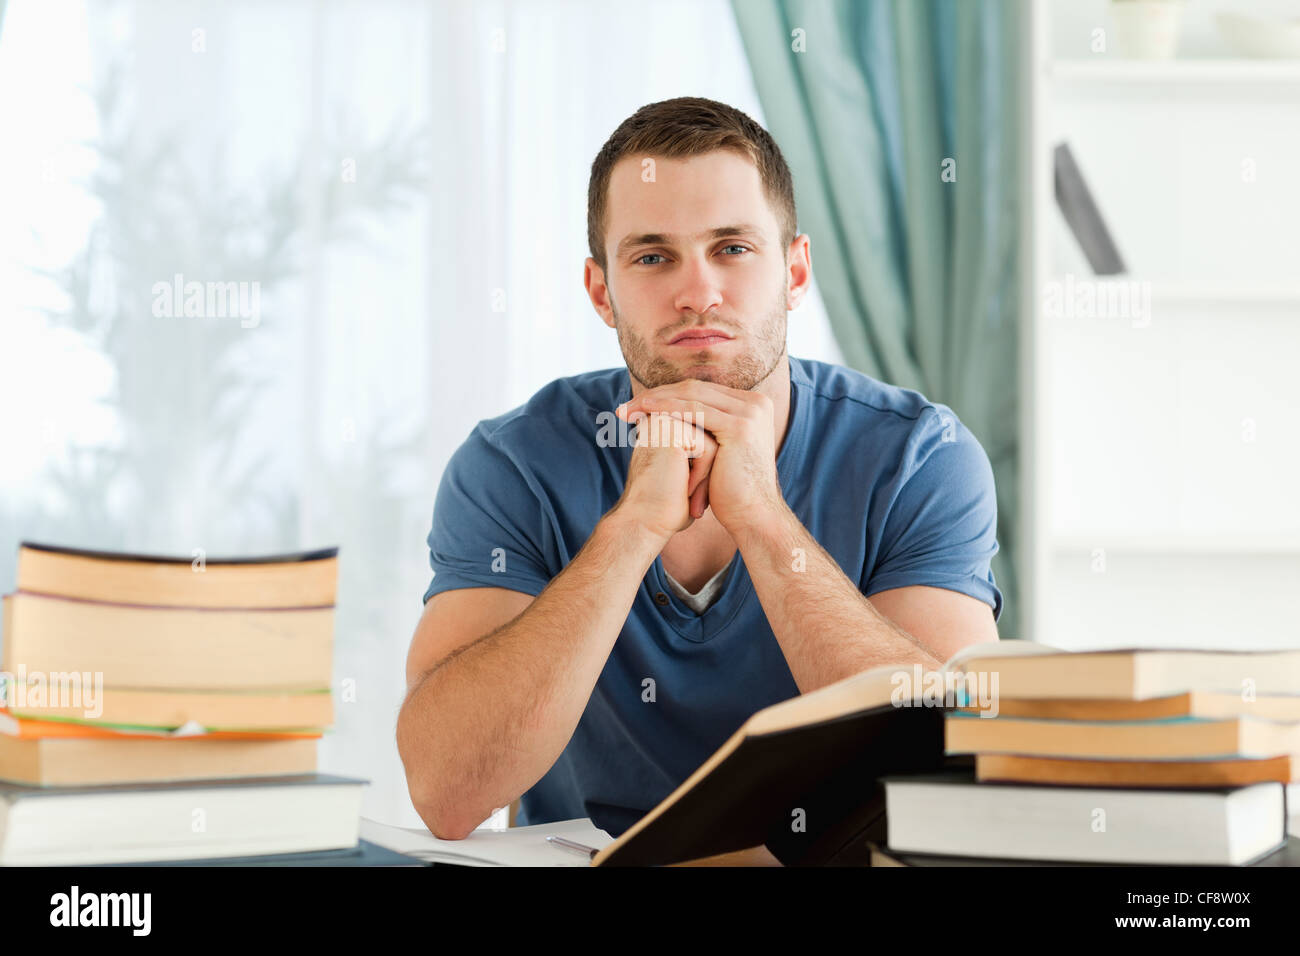 Student sitting at his desk thinking Stock Photo